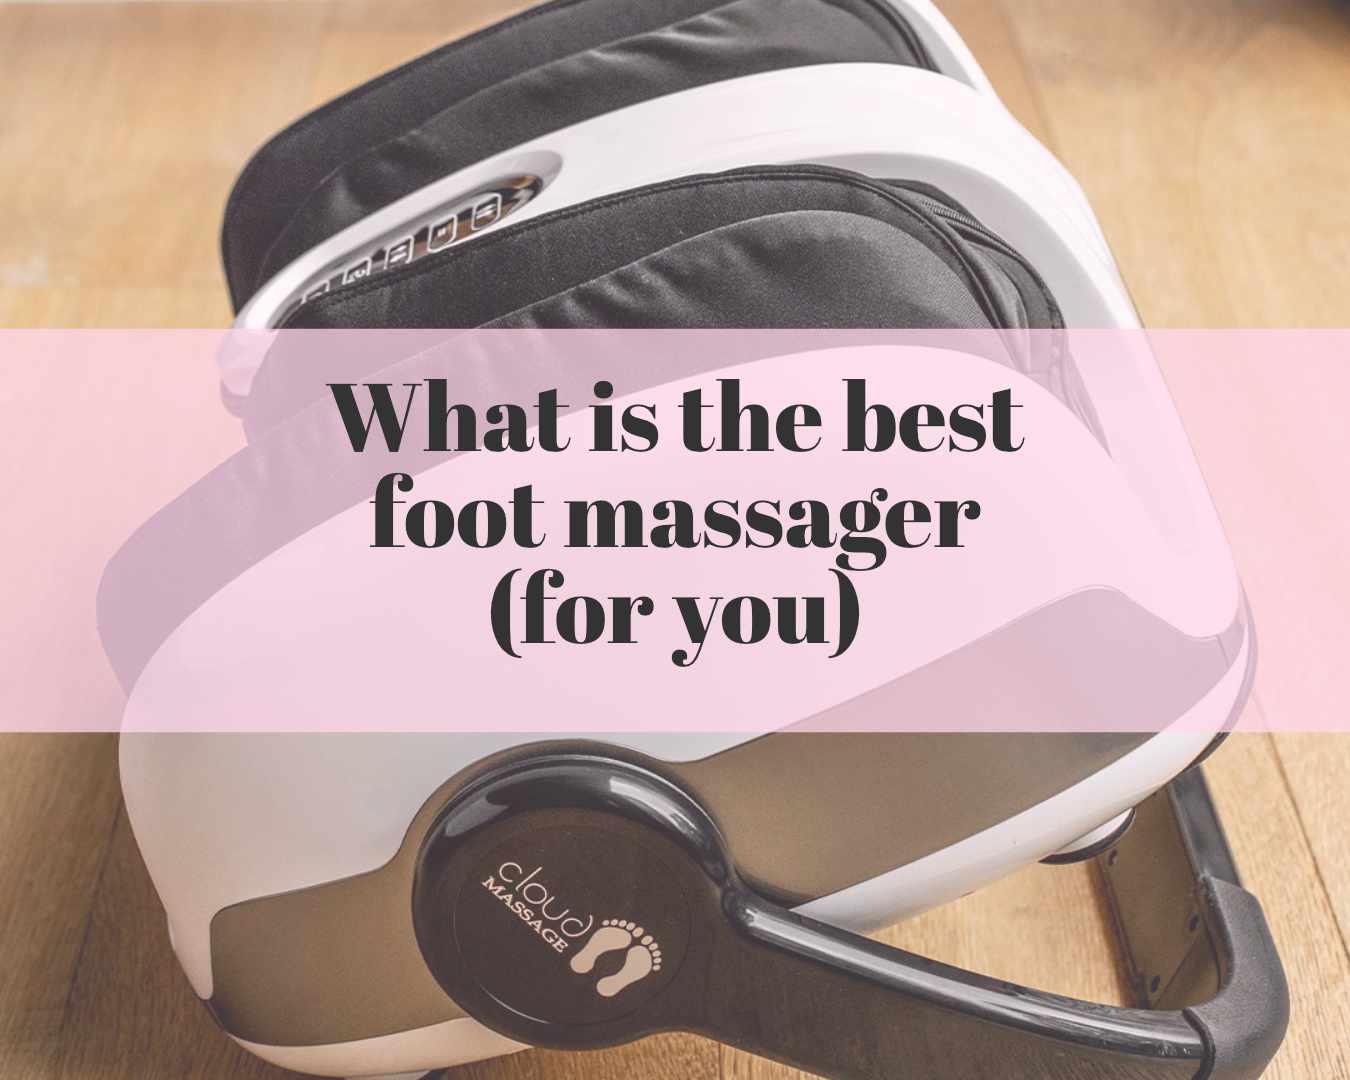 What is the best foot massager (for you)